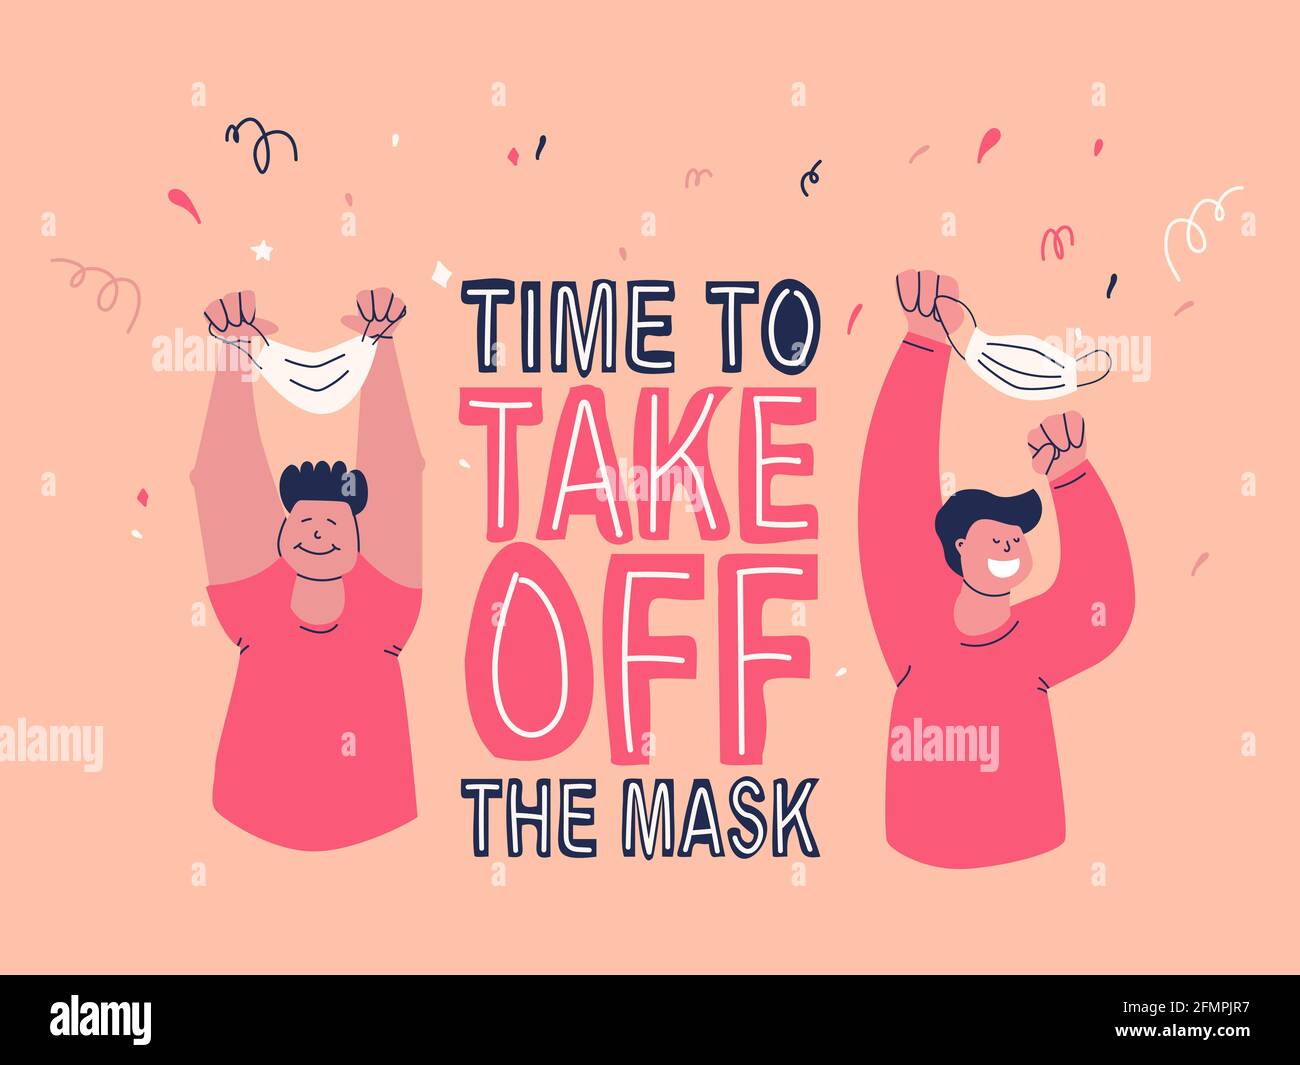 Time to take off the mask. Smiling, happy persons holding protective masks over their heads. Lockdown off. Hand drawing lettering and flat Stock Vector